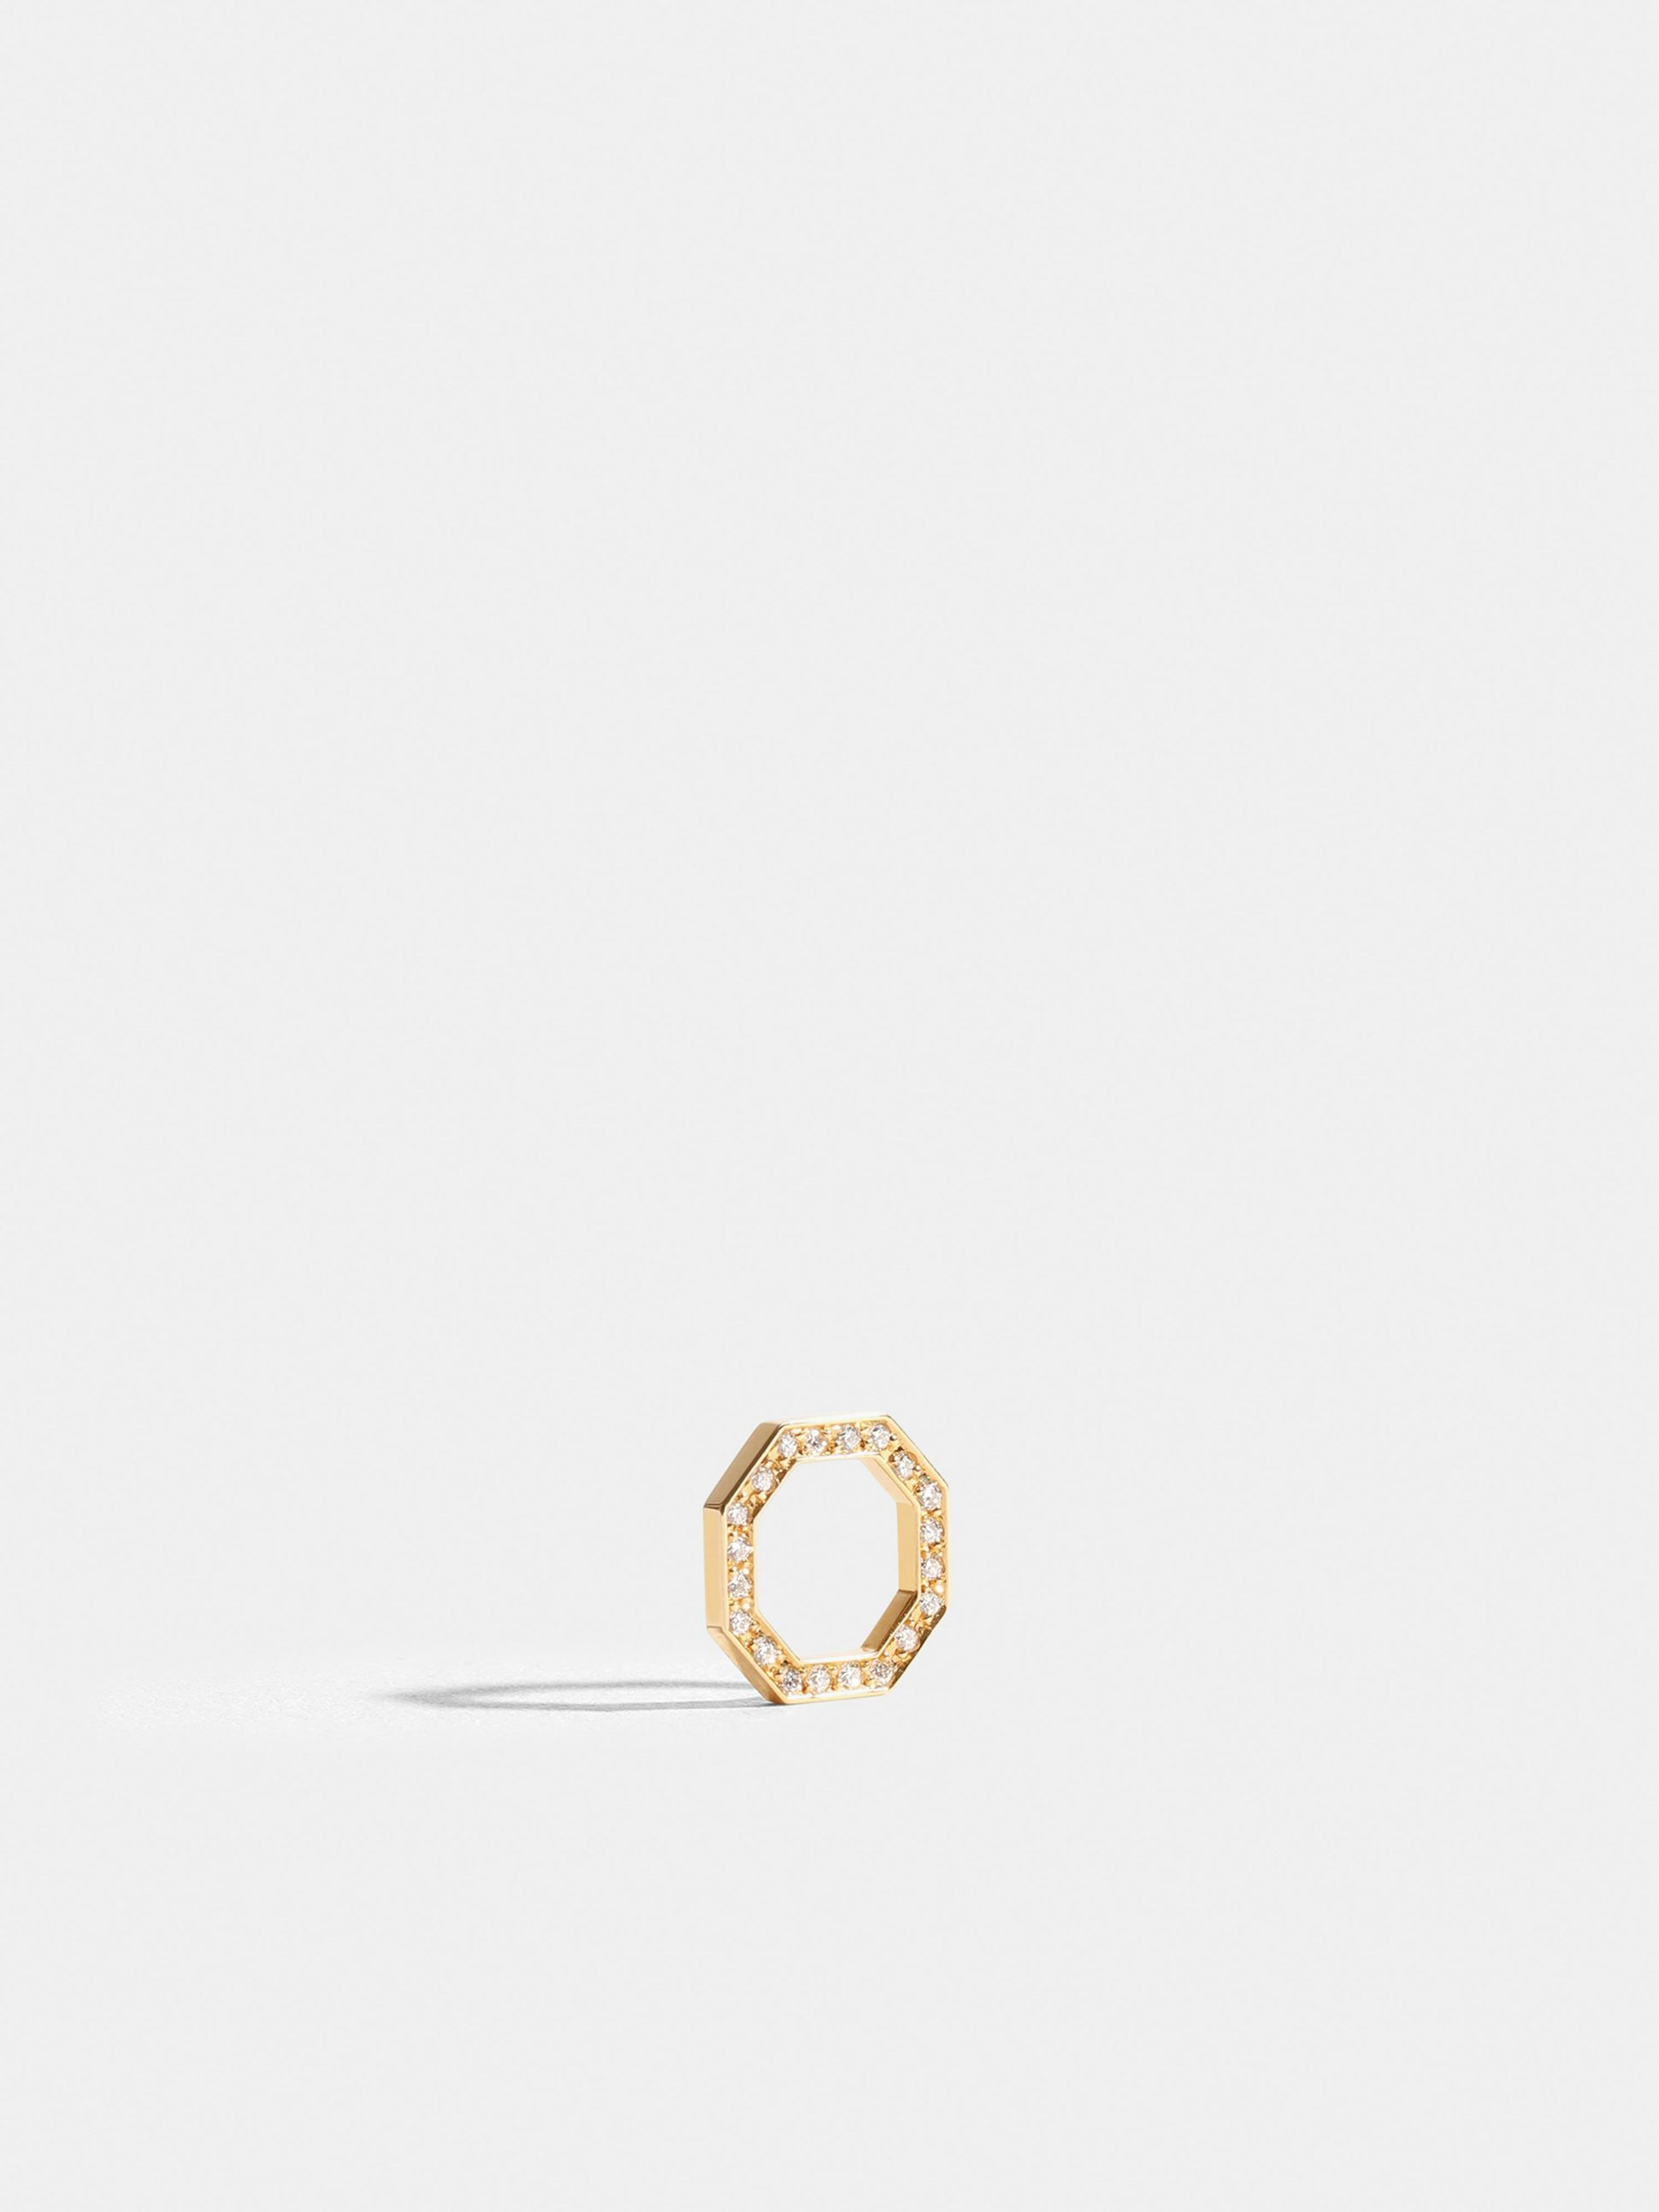 Octogone motif in 18k Fairmined ethical yellow gold, paved with lab-grown diamonds, on a puppy red cord.